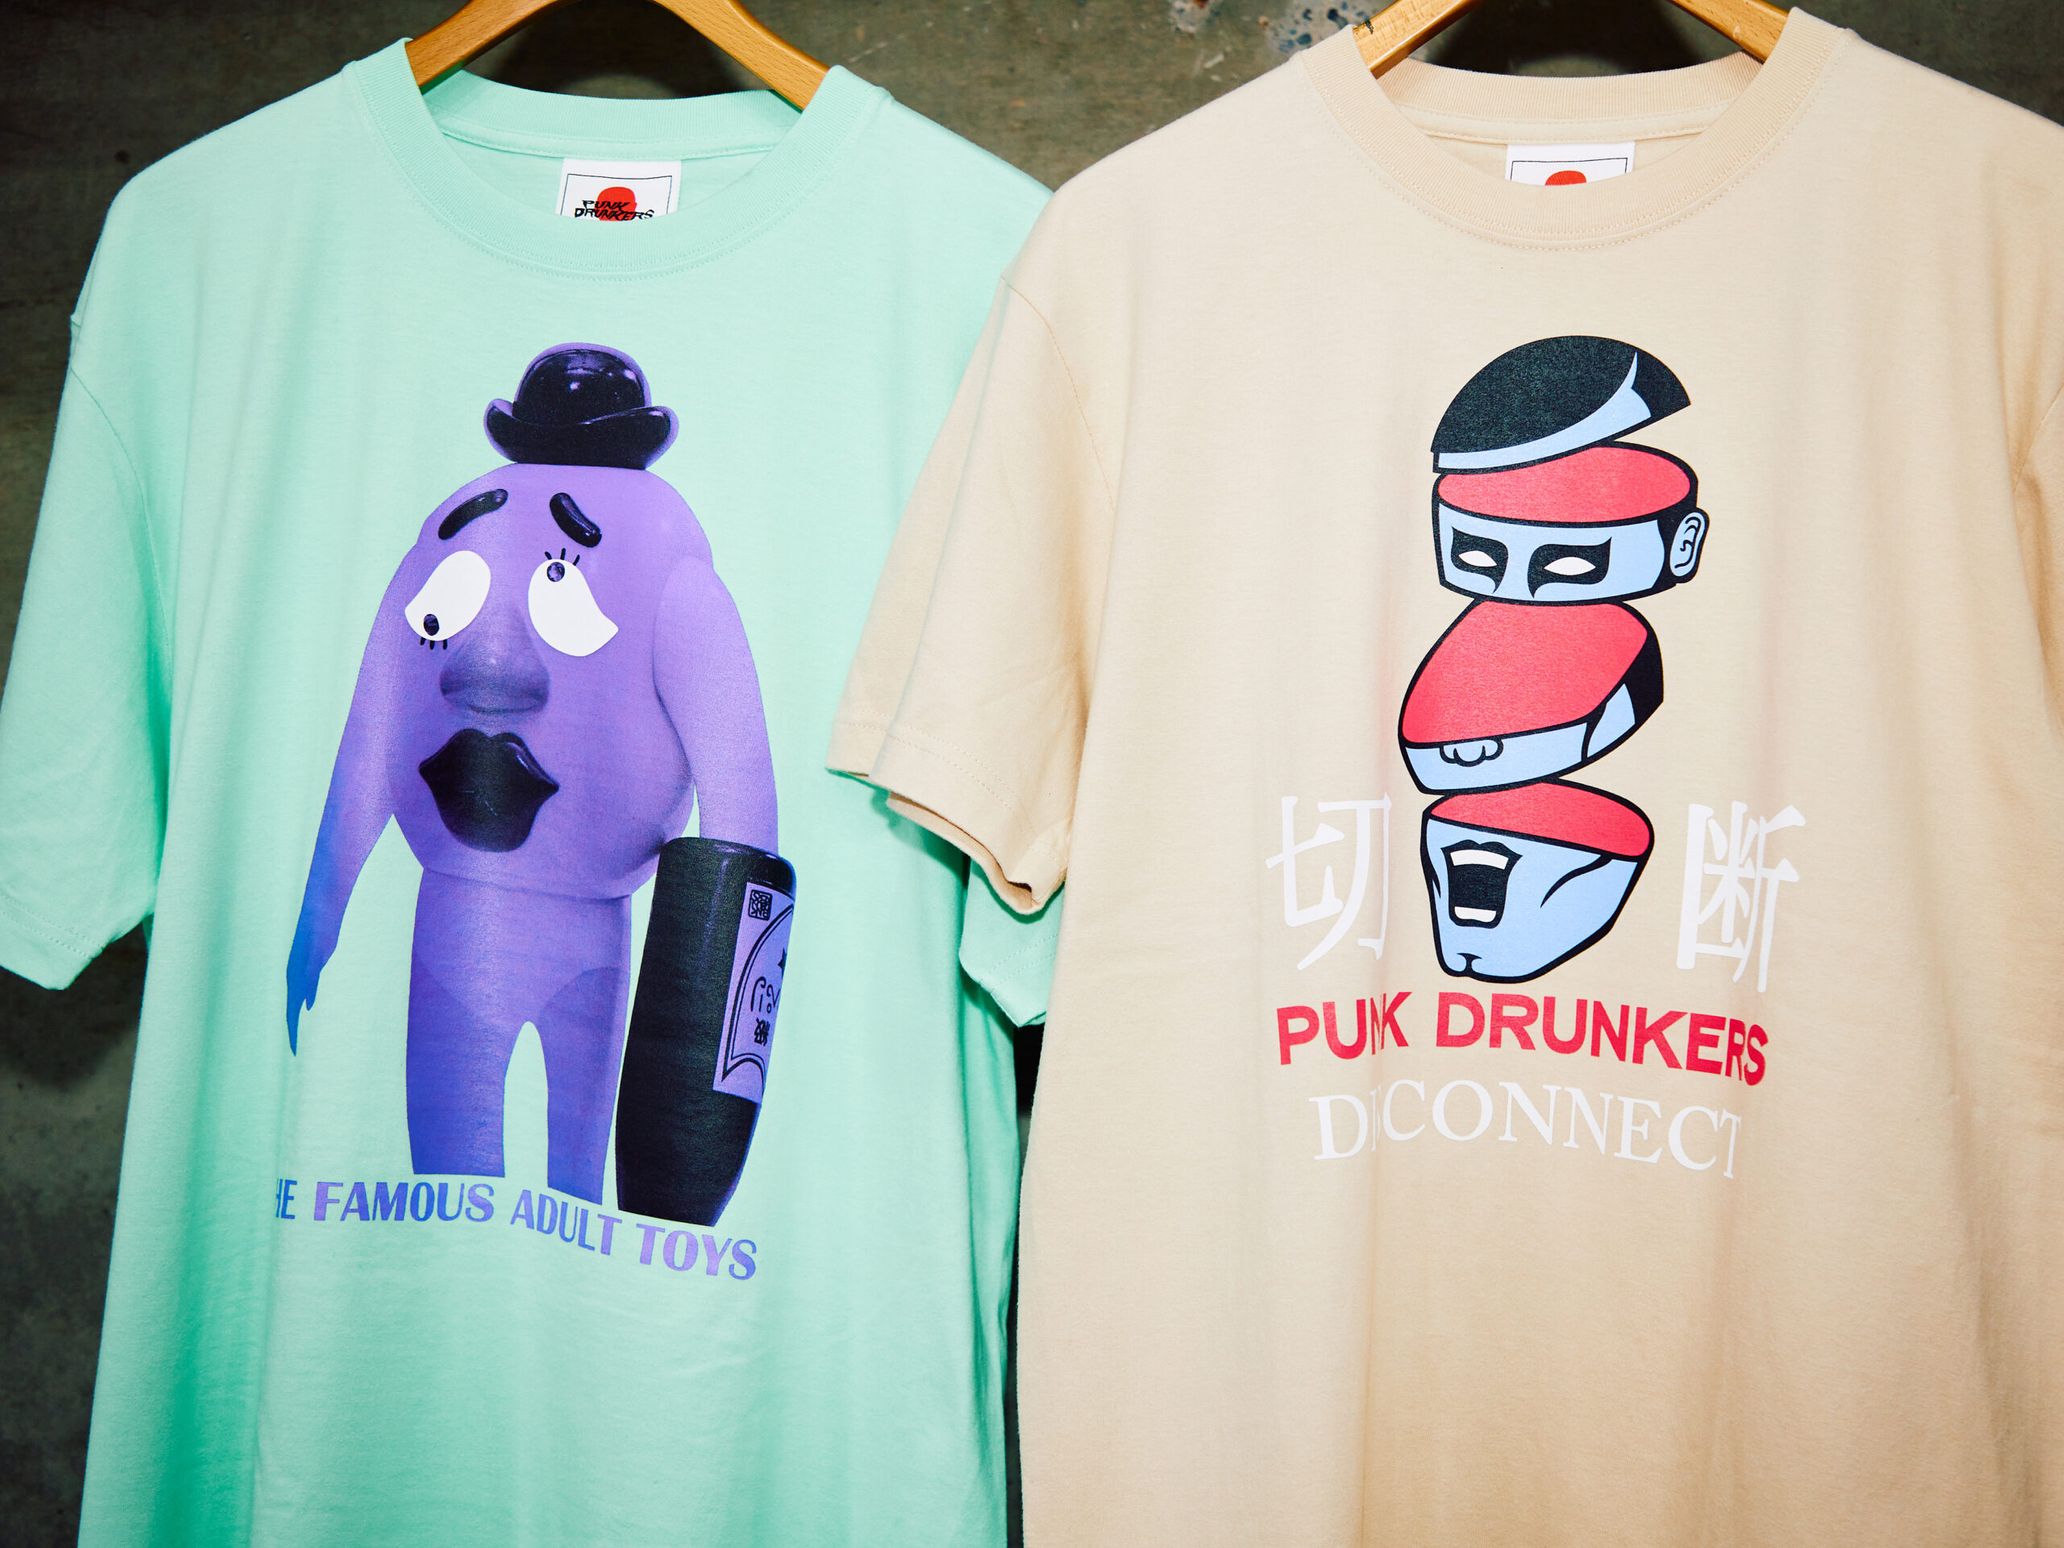 From Punk Drunkers’ Spring collection. There are many dedicated fans of the unique graphics